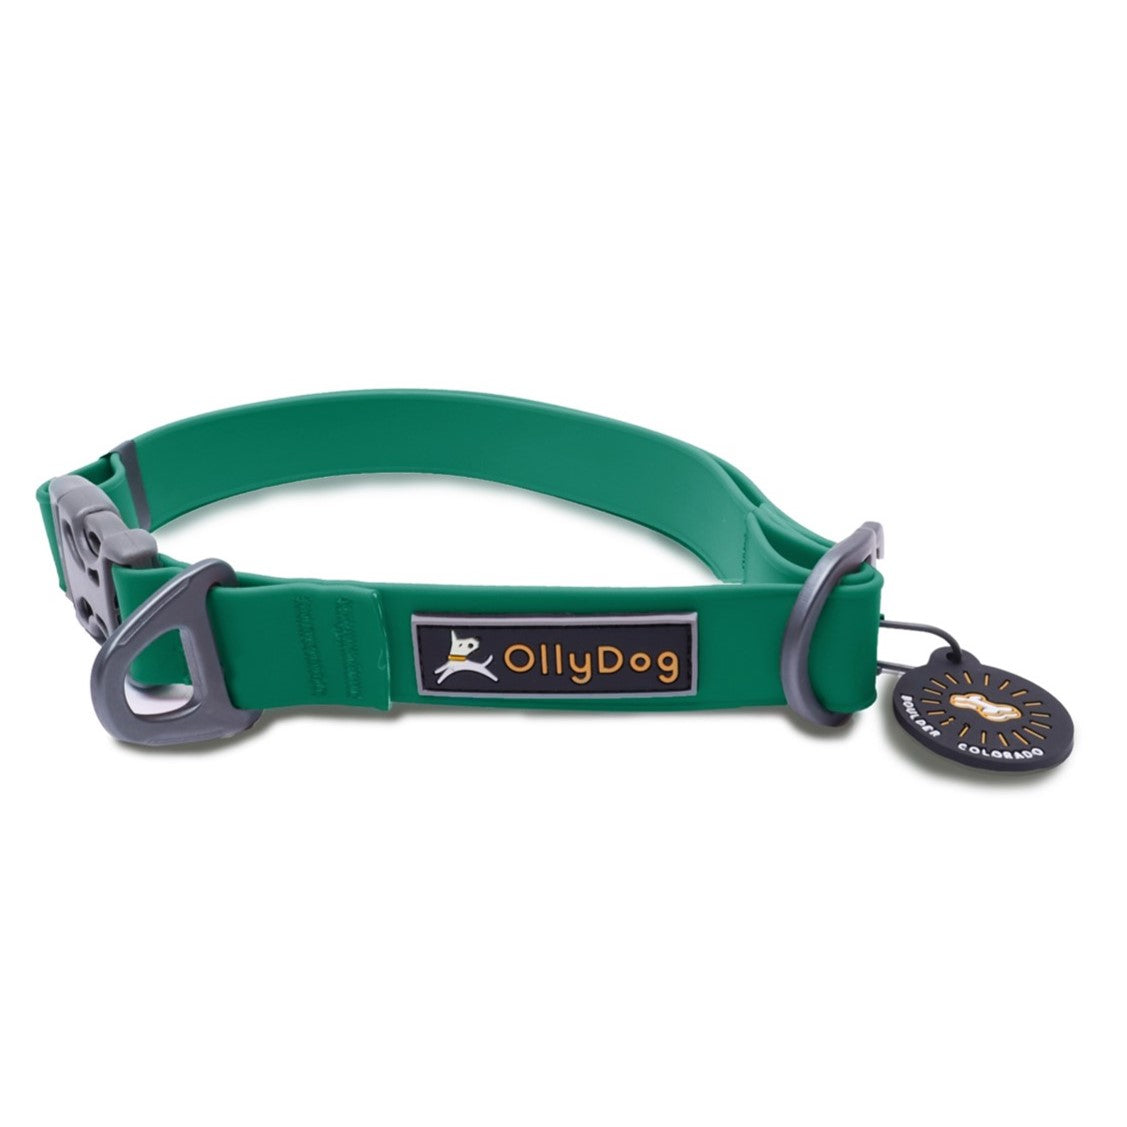 Tilden Waterproof Collar- Save 20% at Checkout